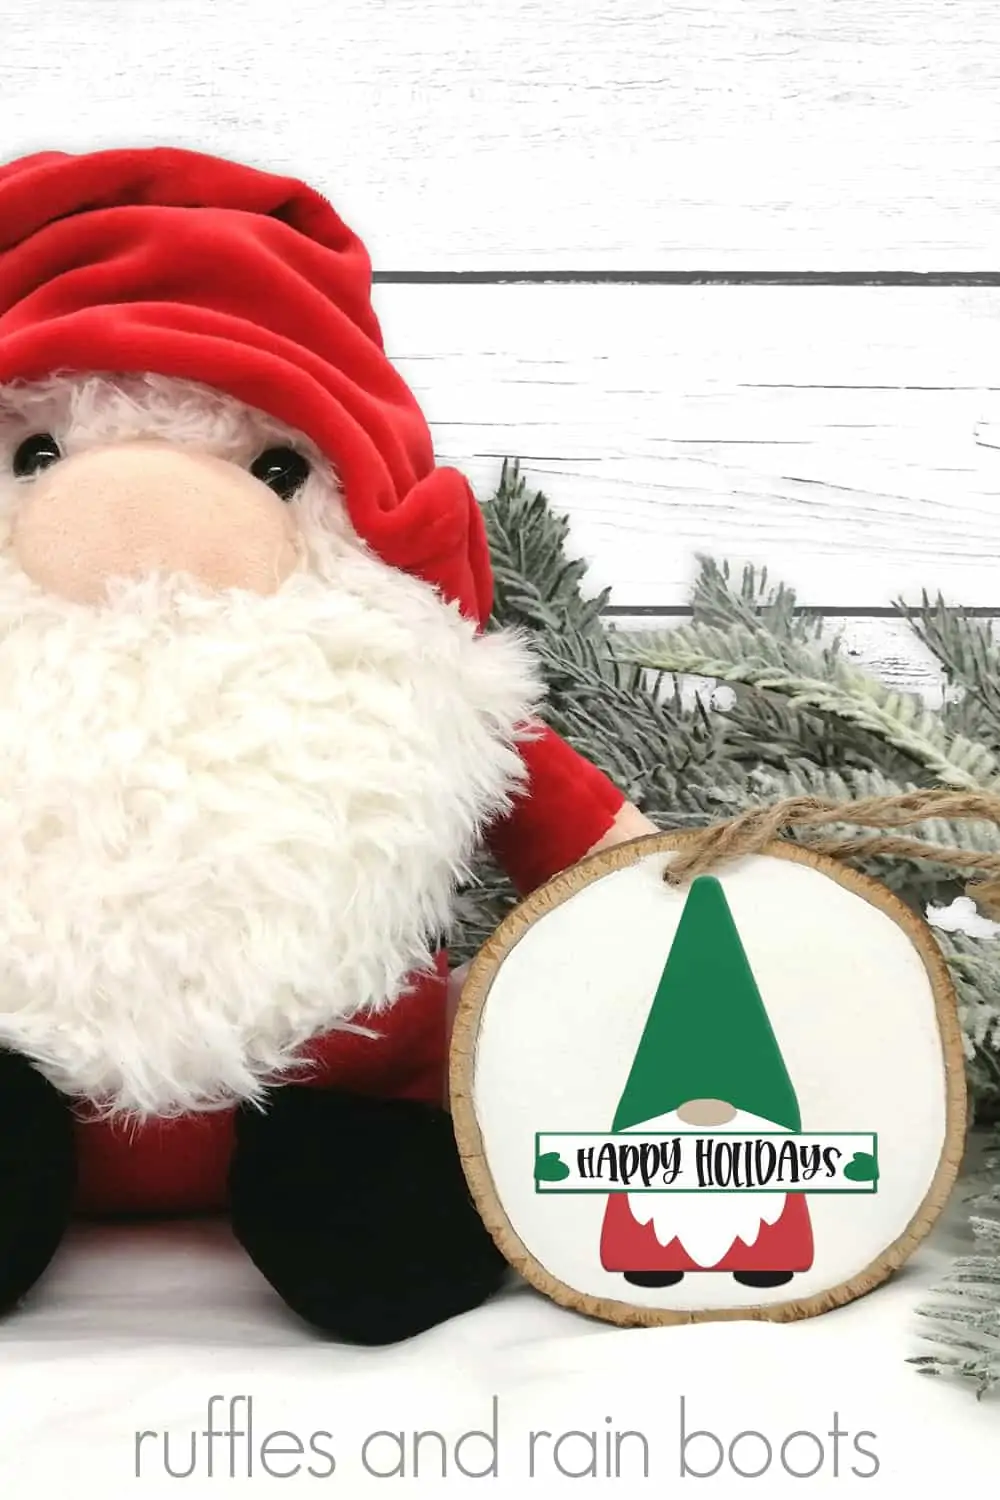 holiday background with large Santa holding an ornament with a Christmas gnome holding a sign cut file in red green and white